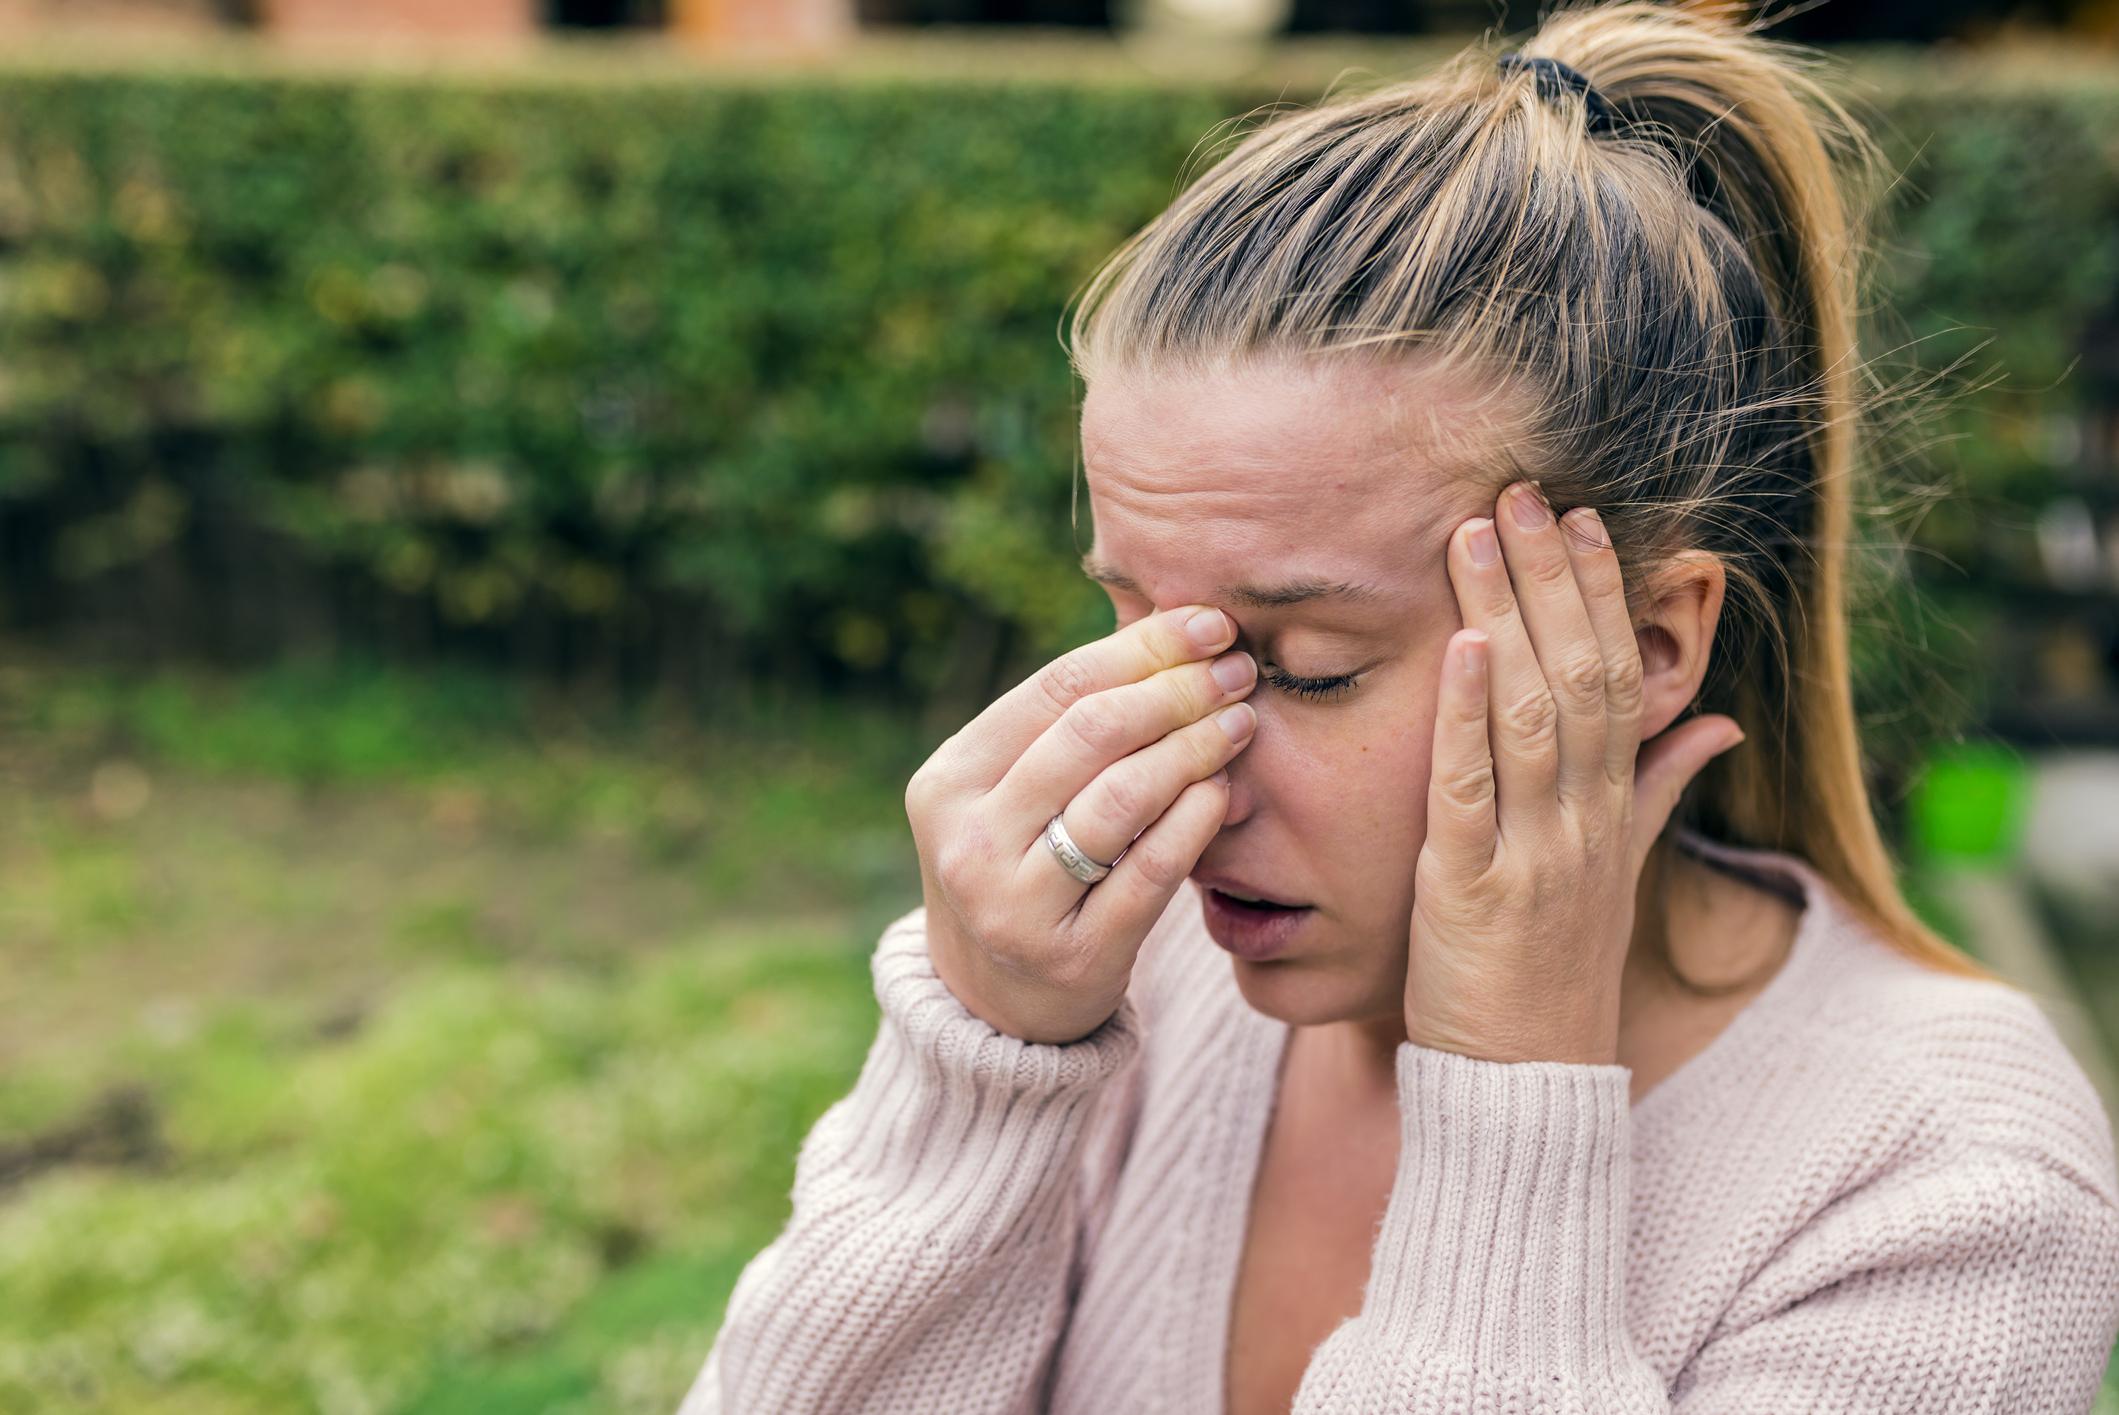 A flushed, dizzy woman with a blonde ponytail holds her head in pain in her front yard